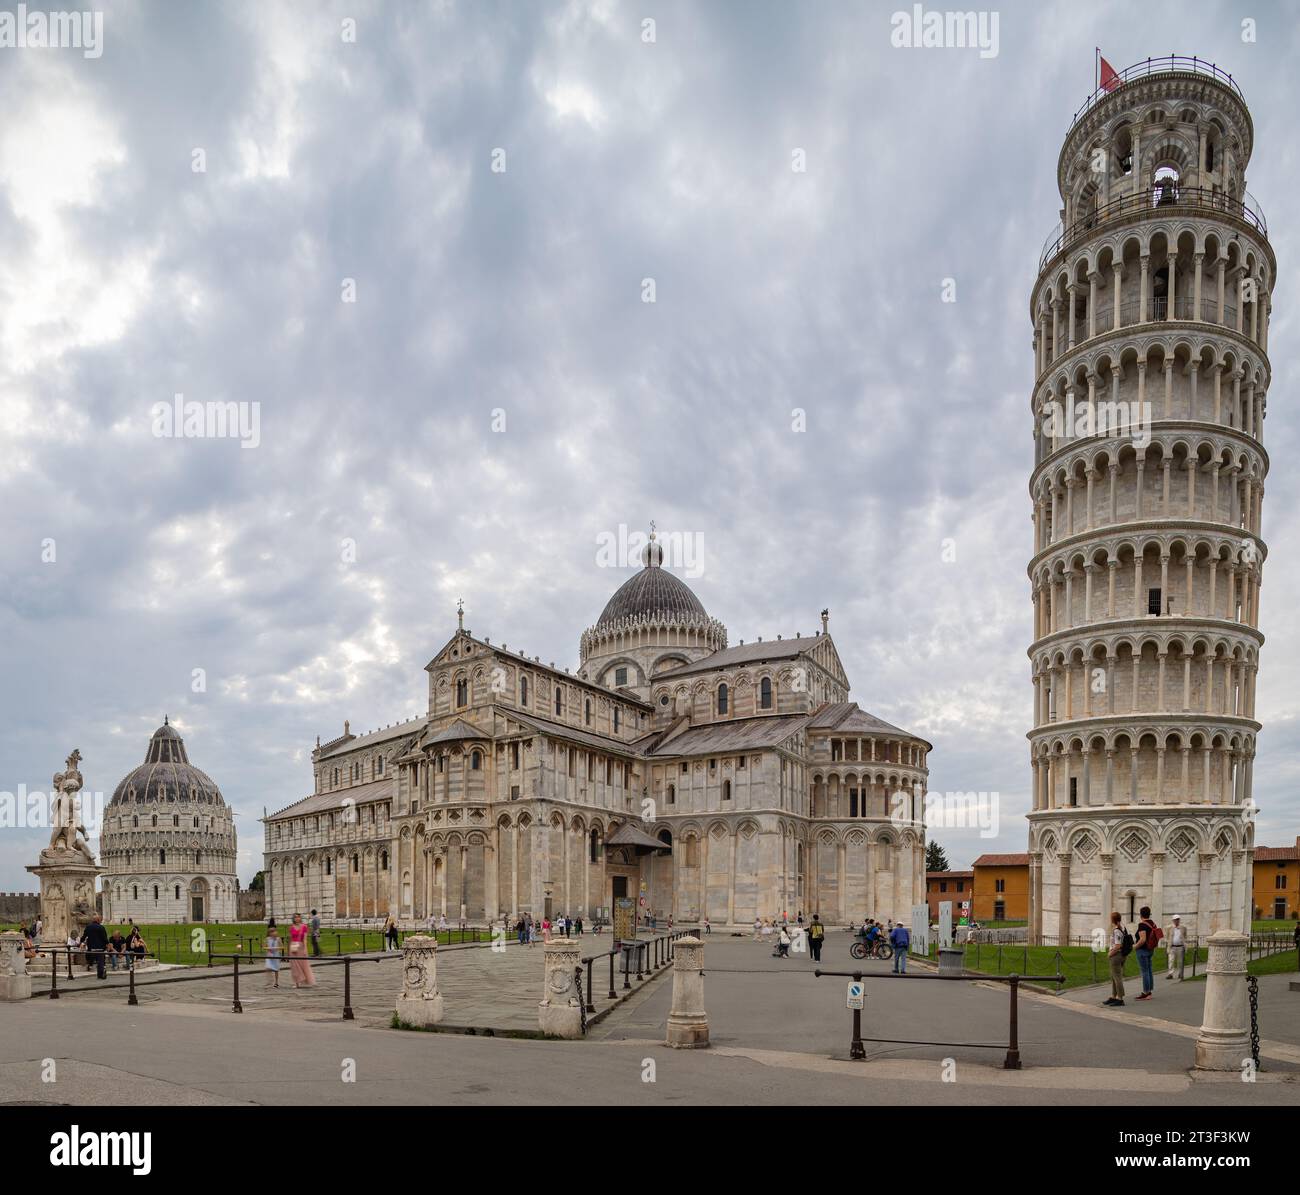 The Piazza dei Miracoli with the leaning tower in Pisa, Italy Stock Photo